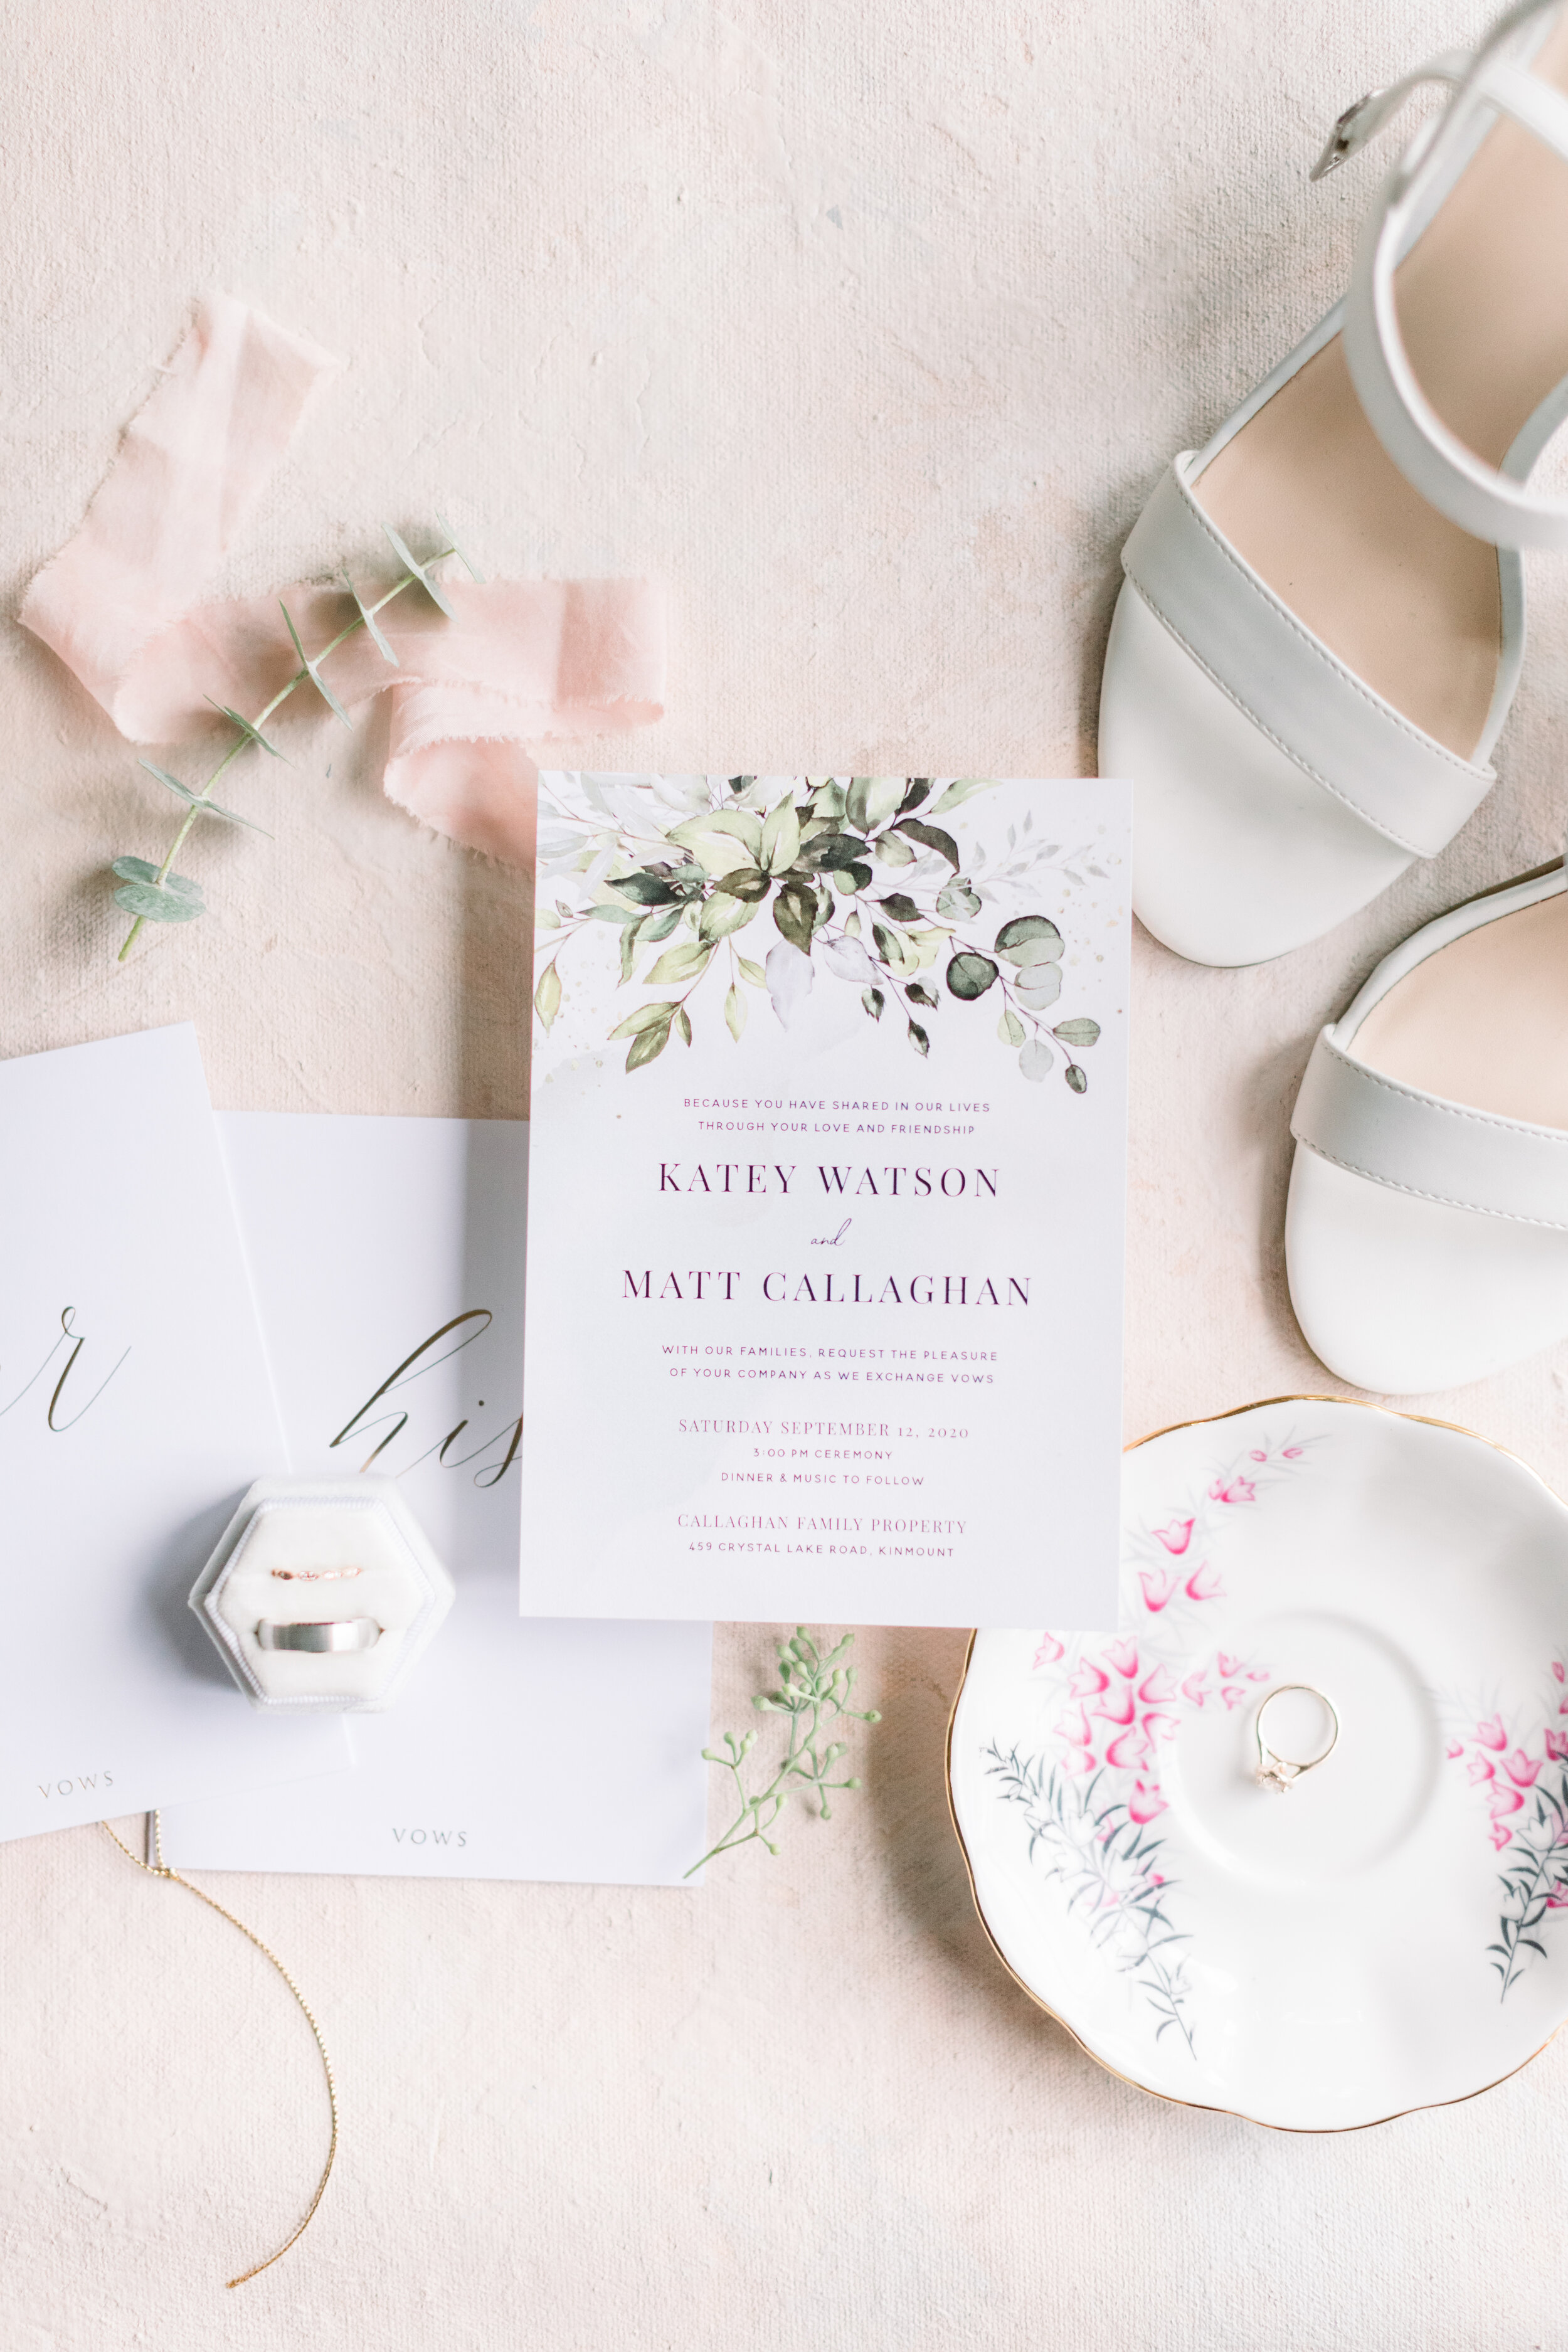  A beautiful close-up shot of all the wedding day details for this beautiful backyard wedding in Ottawa, Canada with Chelsea Mason Photography. Wedding rings diamonds bride pink flowers invitations invites bridal shoes table decor white elegant weddi